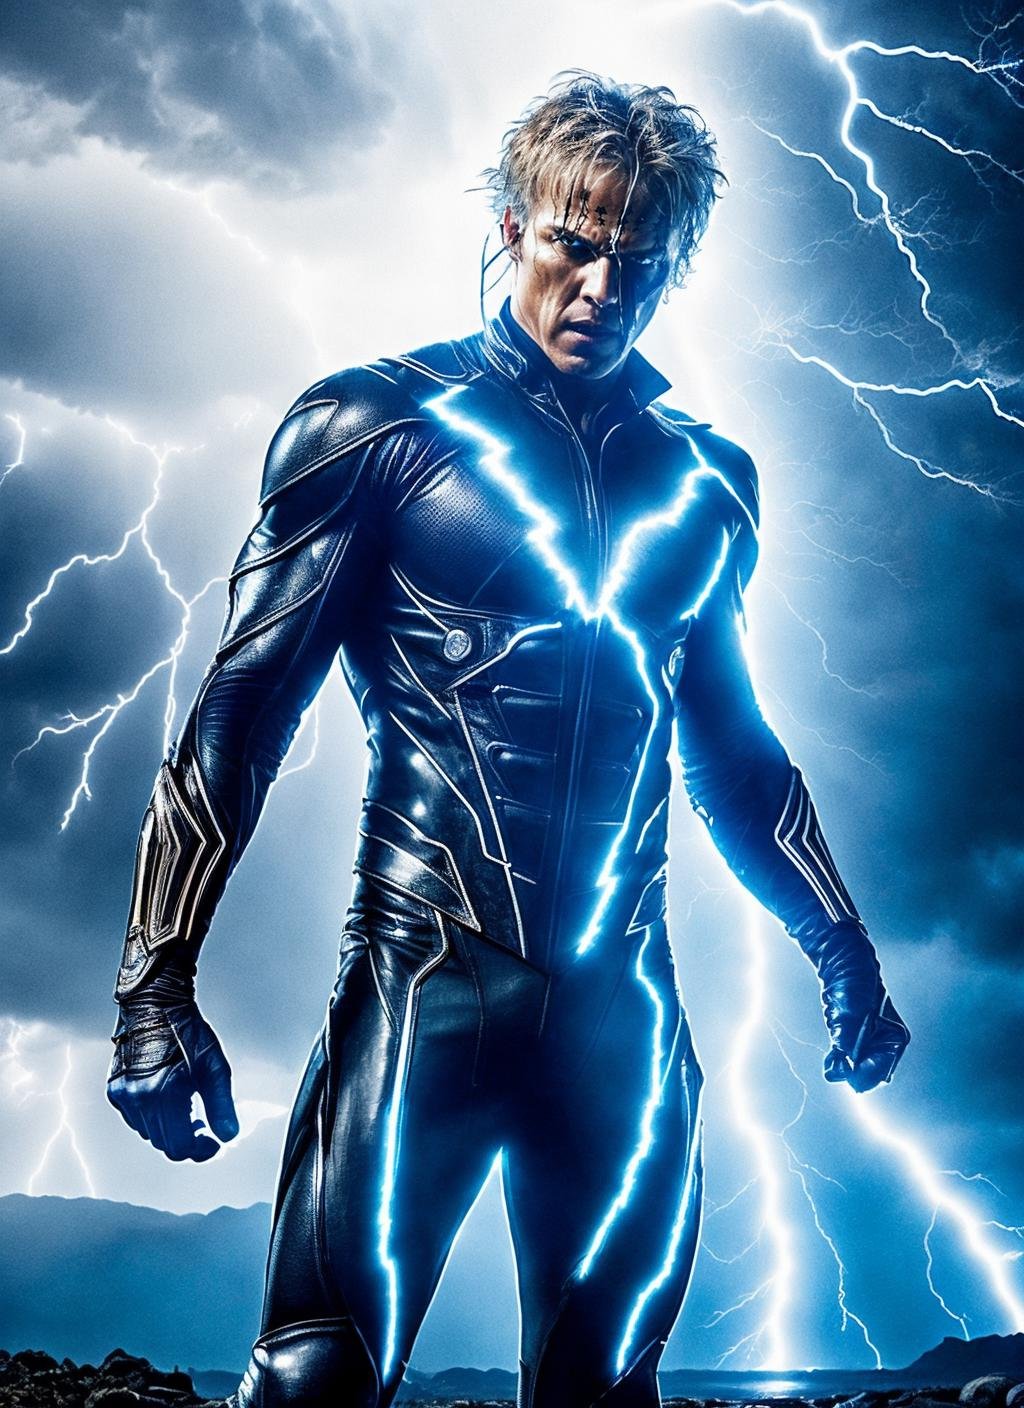 photo of the raiden from mortal combat with lightning thunders, ((lightning coming out of body)), ((covered in electricity)), unleashing a powerful lightning attack, lightning bolts surging throughout  <lora:locon_conceptlightning_v1_from_v1_64_32:1> lghtnngprsn, natural lighting,  by Gerda Taro<lora:add_detail:0.7>cinematic, intricate details, 32K, UHD, HDR, ultra-realism, action background (heavy damage and debris), ultra-detailed, 32k, intricate, cinematic composition, IMAX, stunning image, trending, amazing art, cinematic color grade, dramatic lighting(lightning), electrical surges through the body, covered in electricity